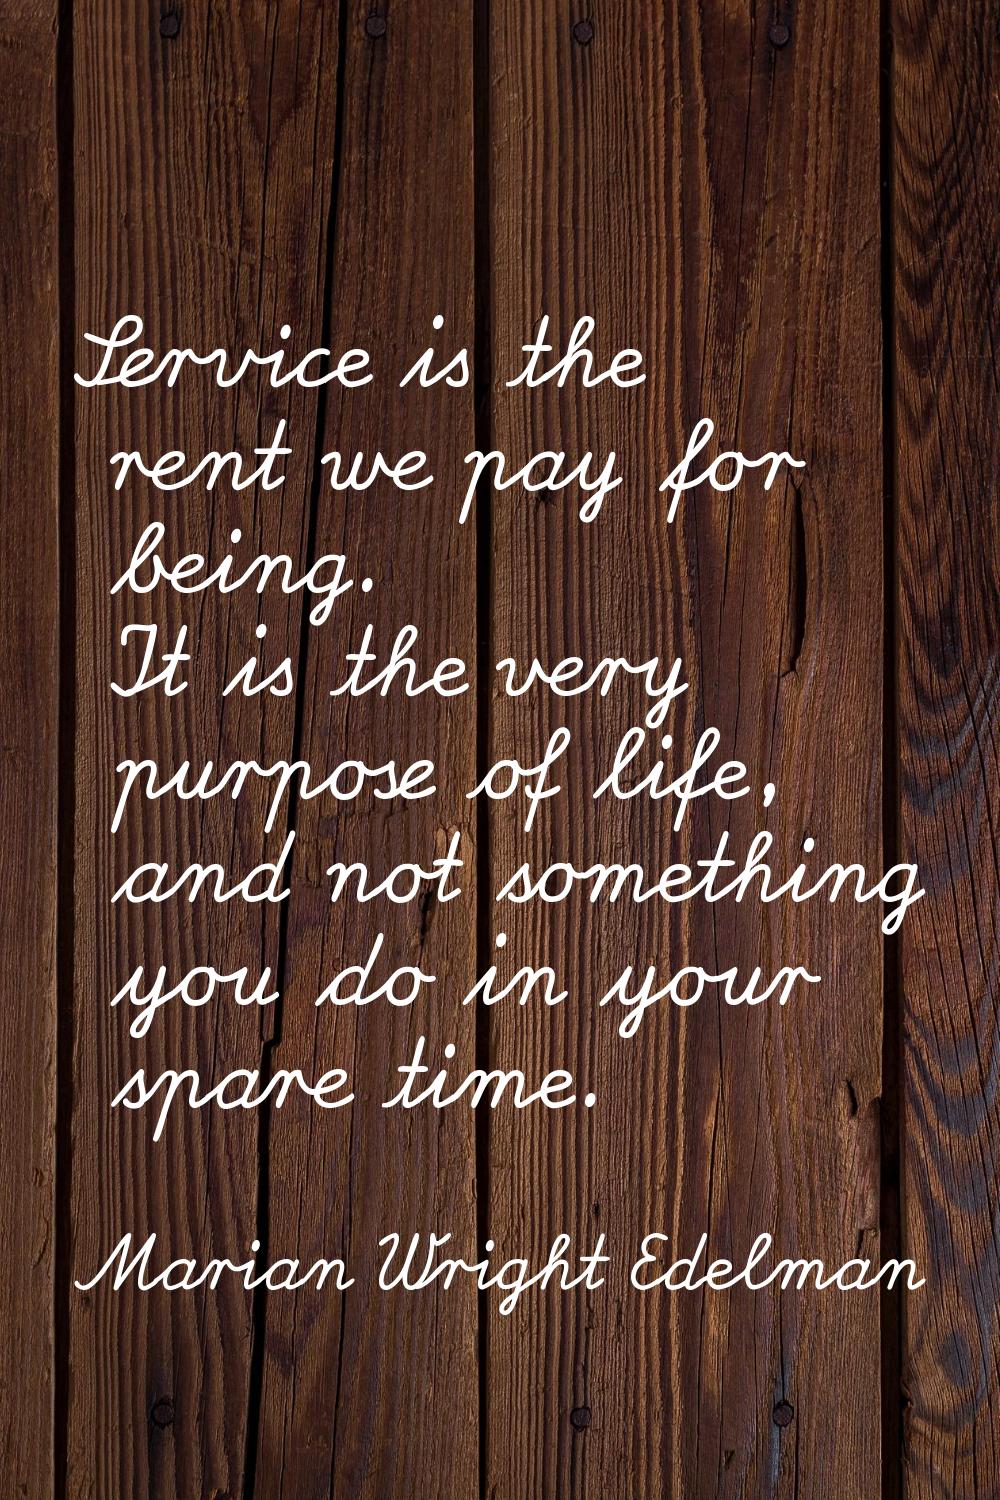 Service is the rent we pay for being. It is the very purpose of life, and not something you do in y